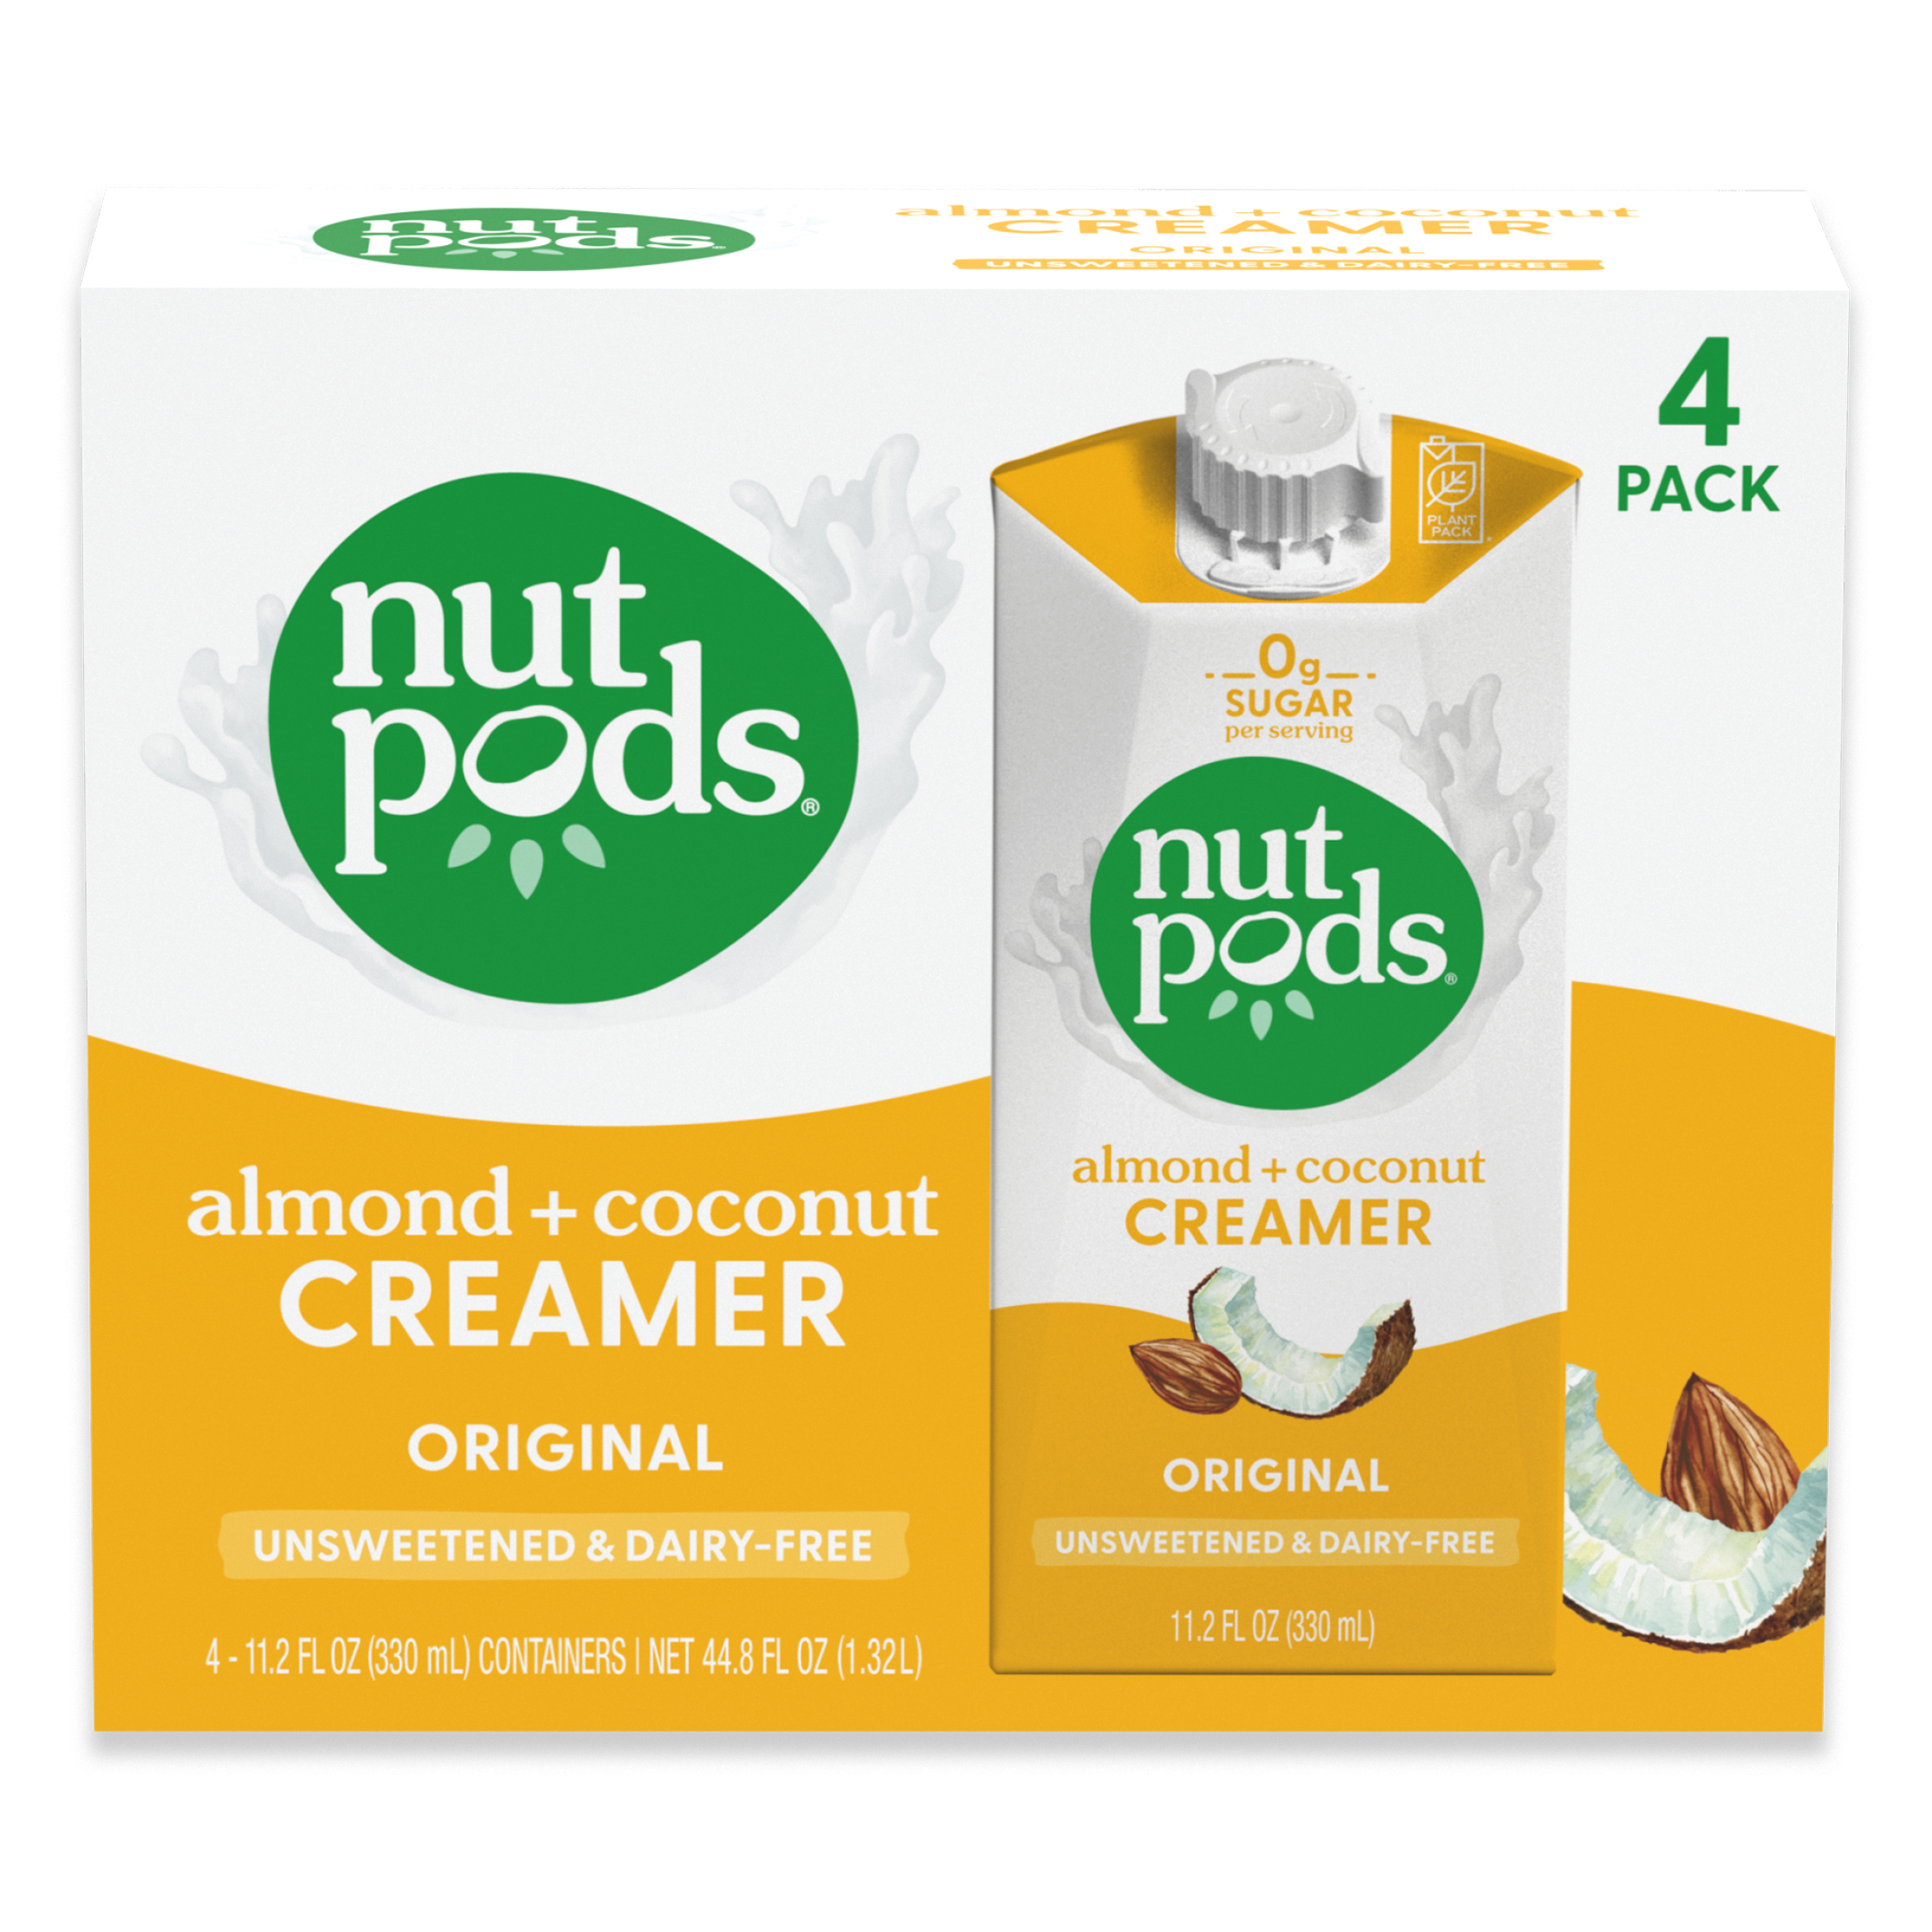 Unsweetened Almond and Coconut Original Creamer 4 Pack